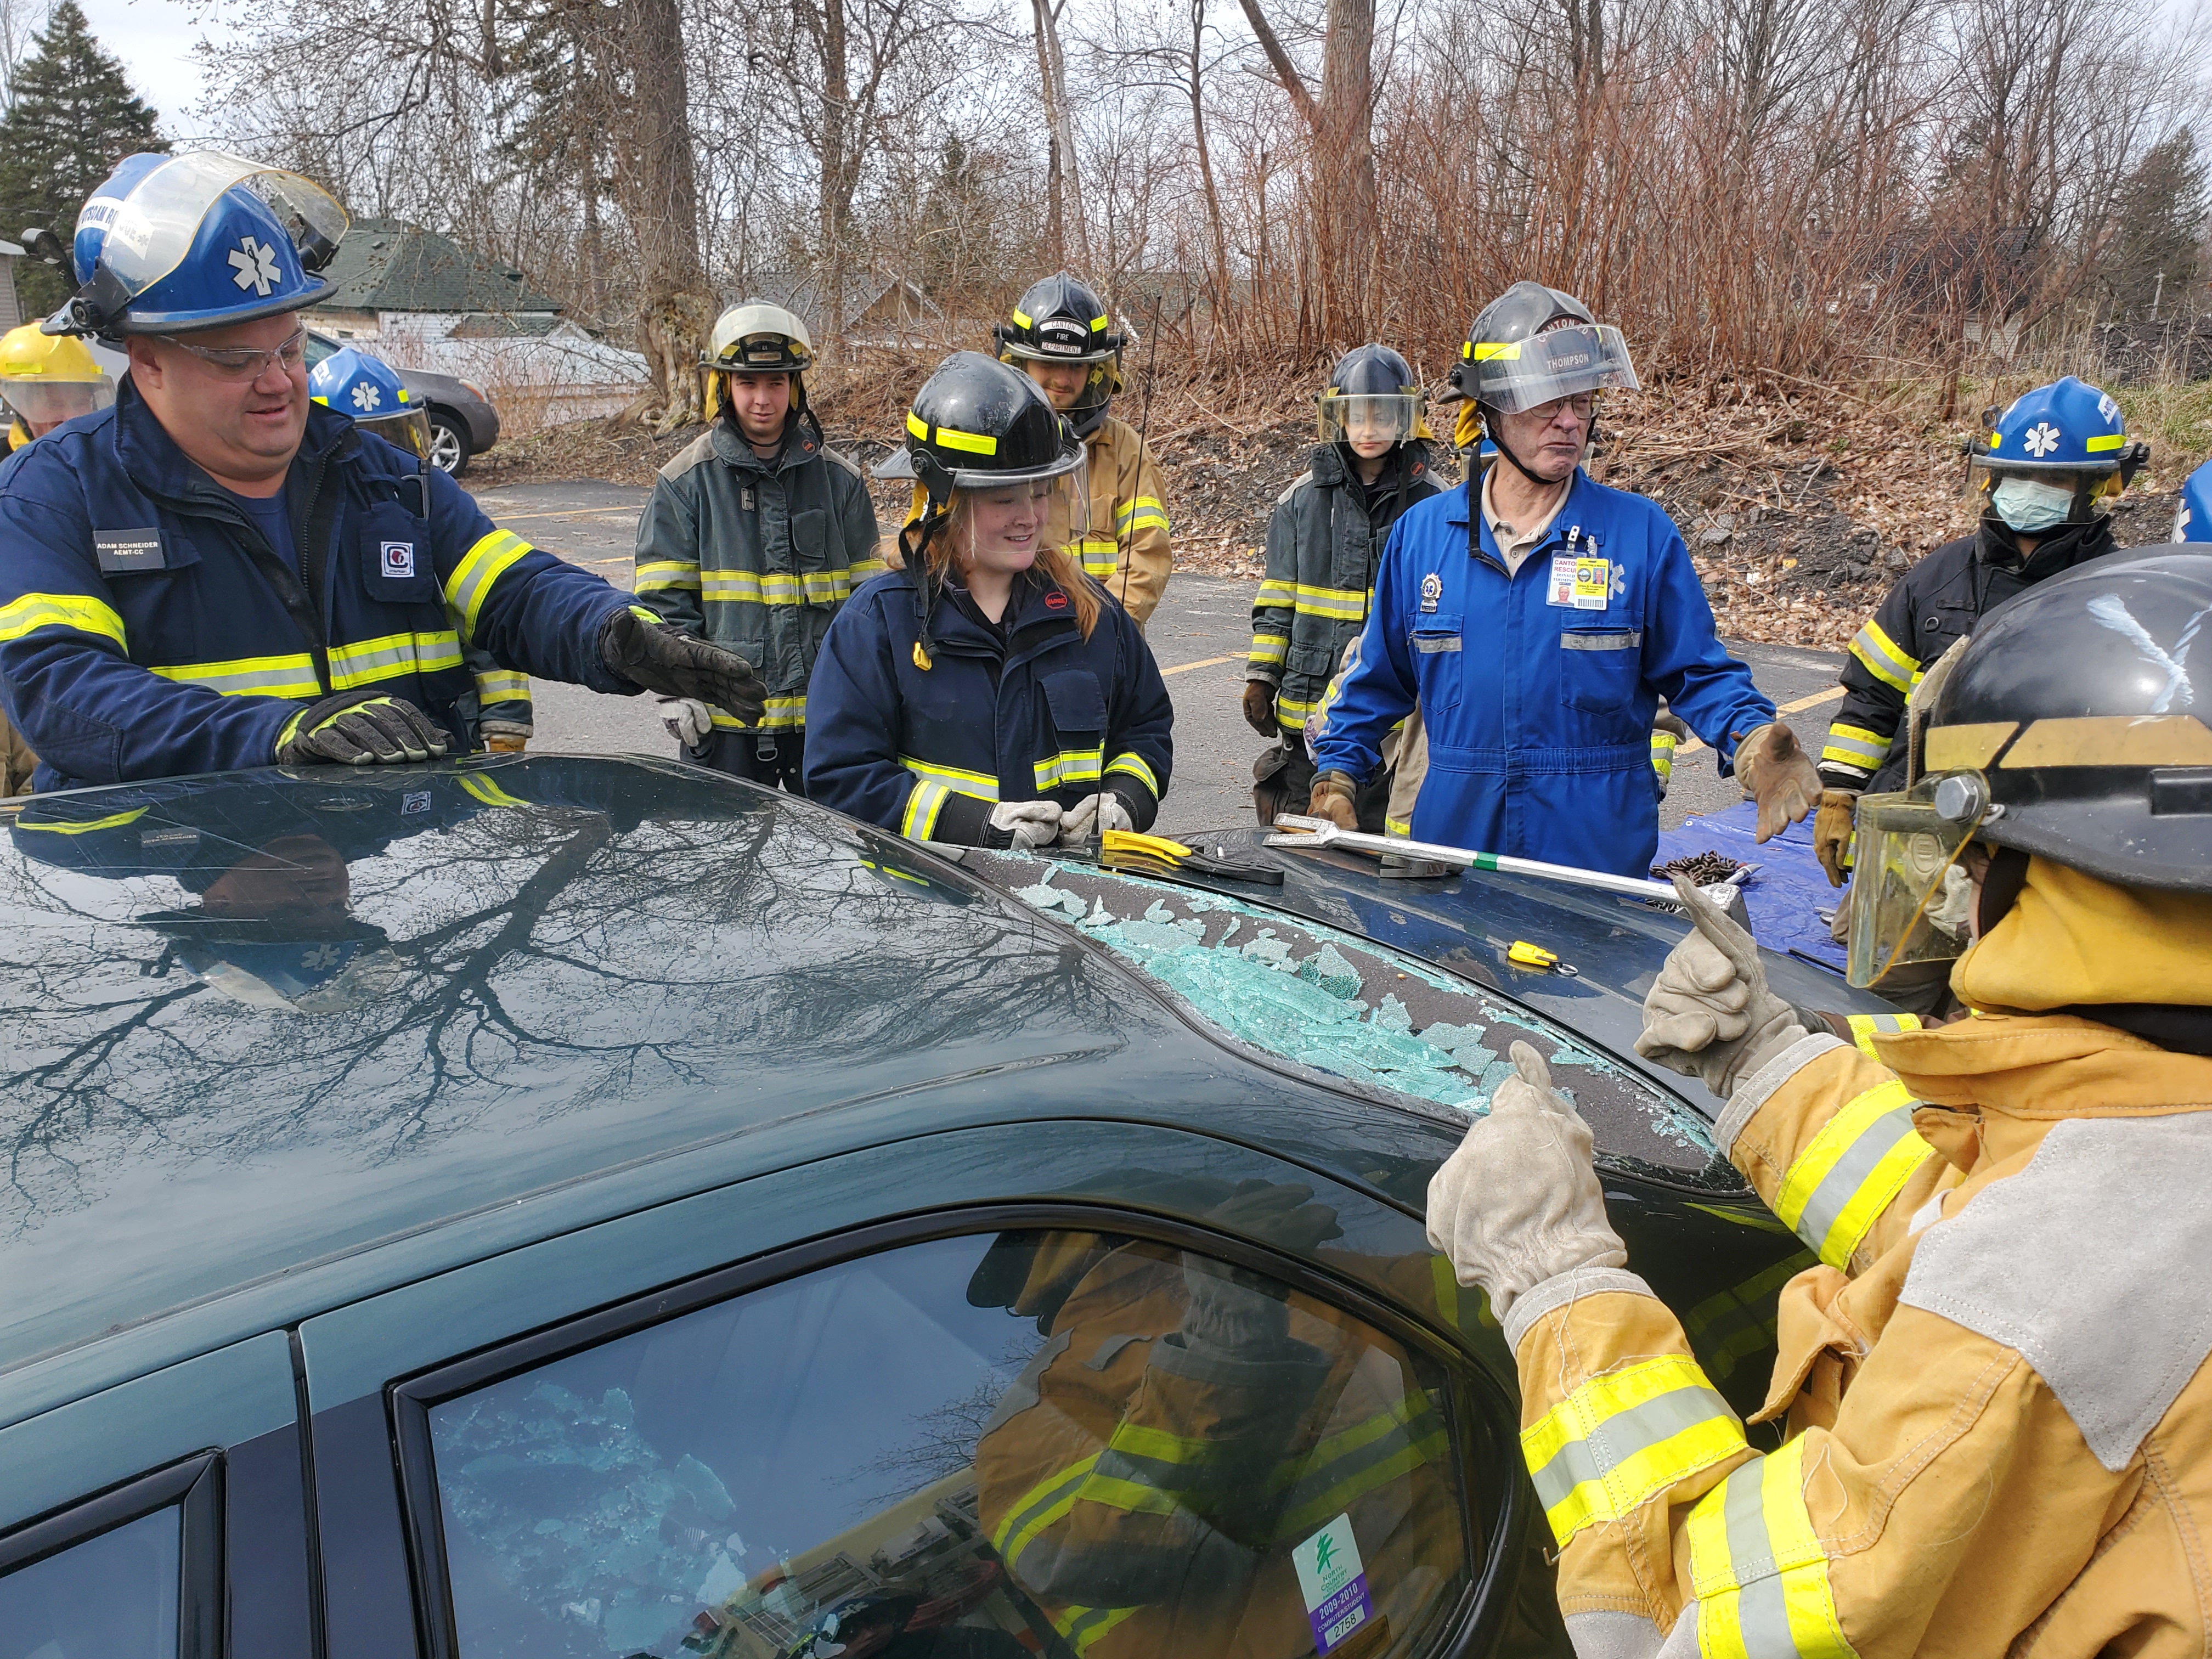 Firefighters and EMS professionals work on a broken car windshield